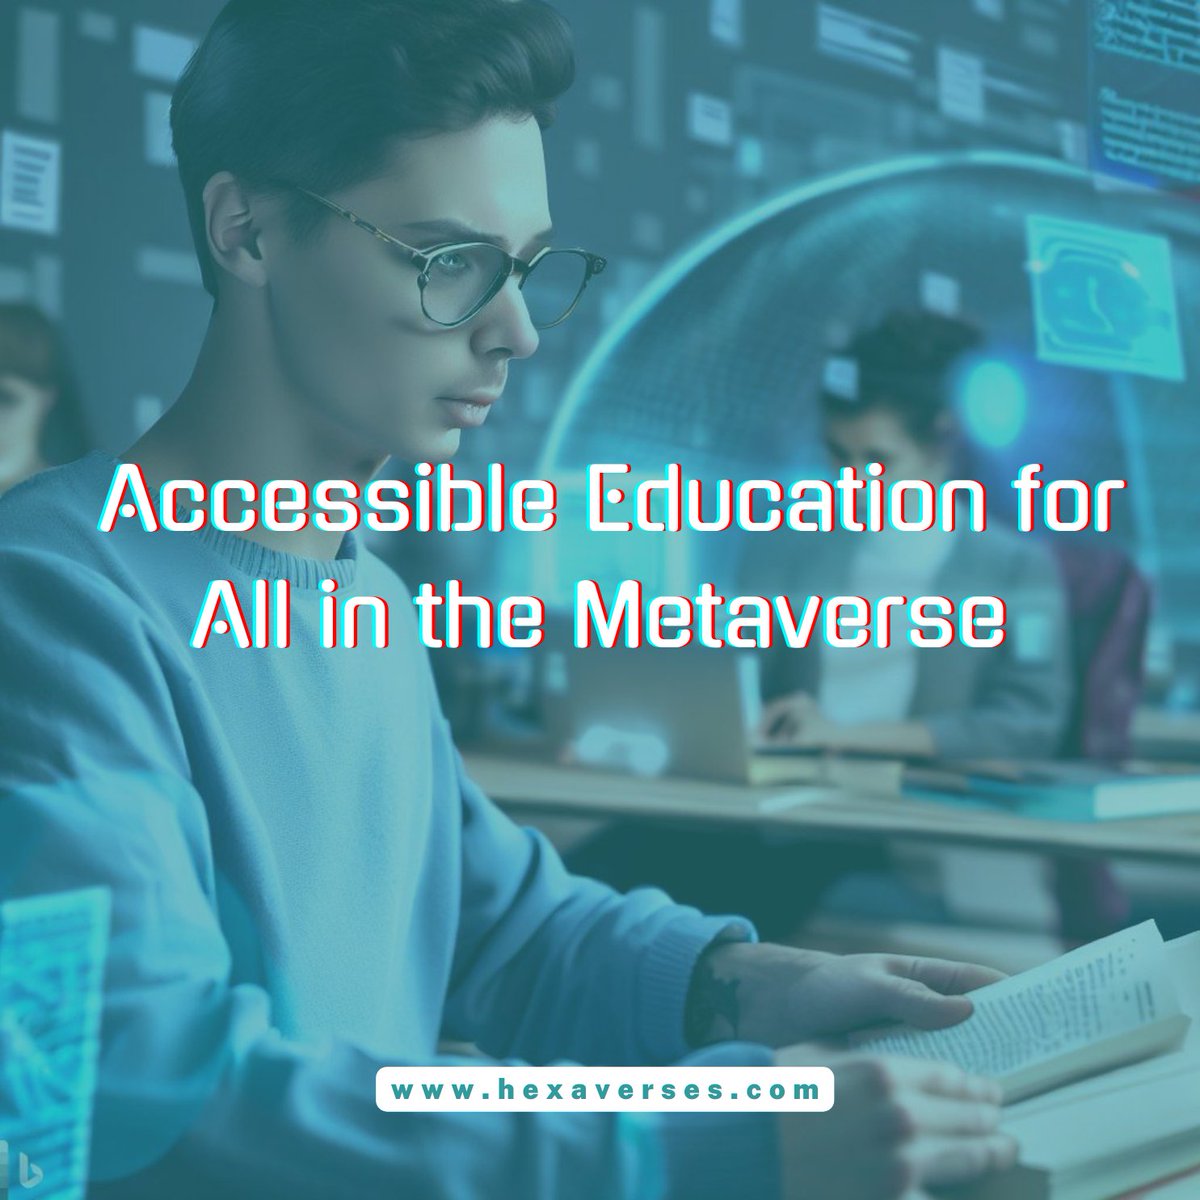 Accessible Education for All in the Metaverse

#learn2earnmetaverse #metaclassroom #metaverseineducation #education #edtech #futurelearning #metaverseeducation #nextgenlearning #virtuallearning #futureoflearning #edtechrevolution

🔥Website: hexaverses.com